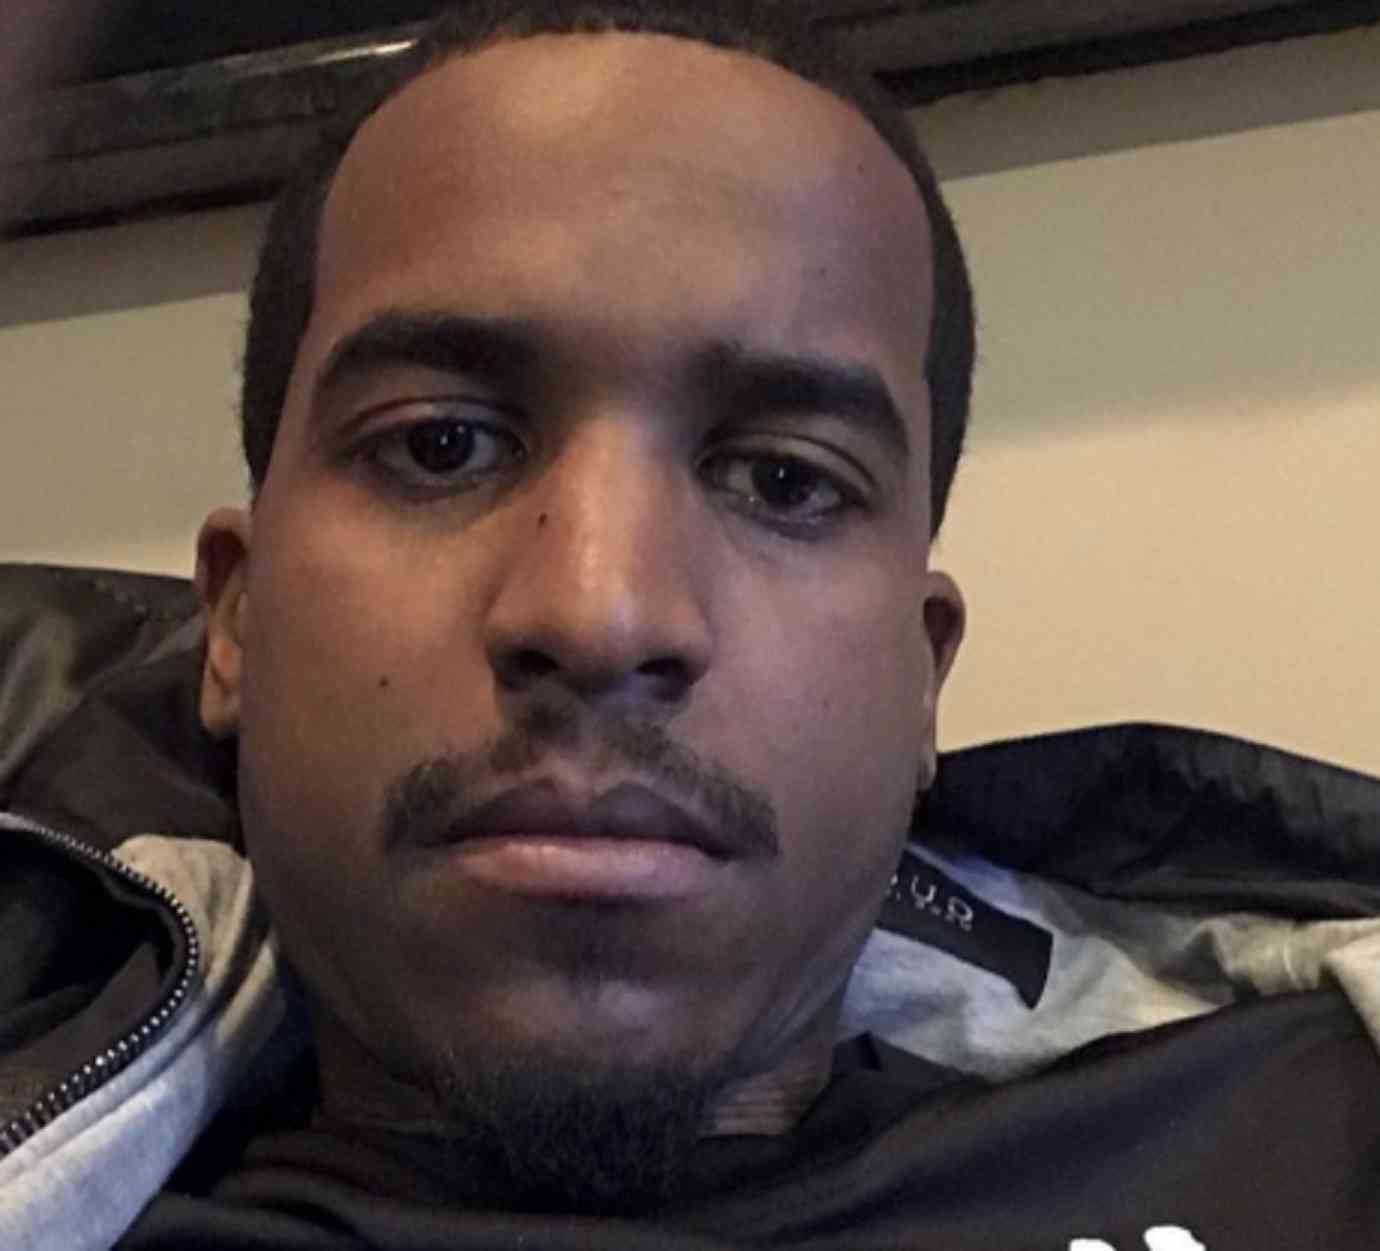 Lil Reese Threatens to Beat Up Quando Rondo ON SIGHT